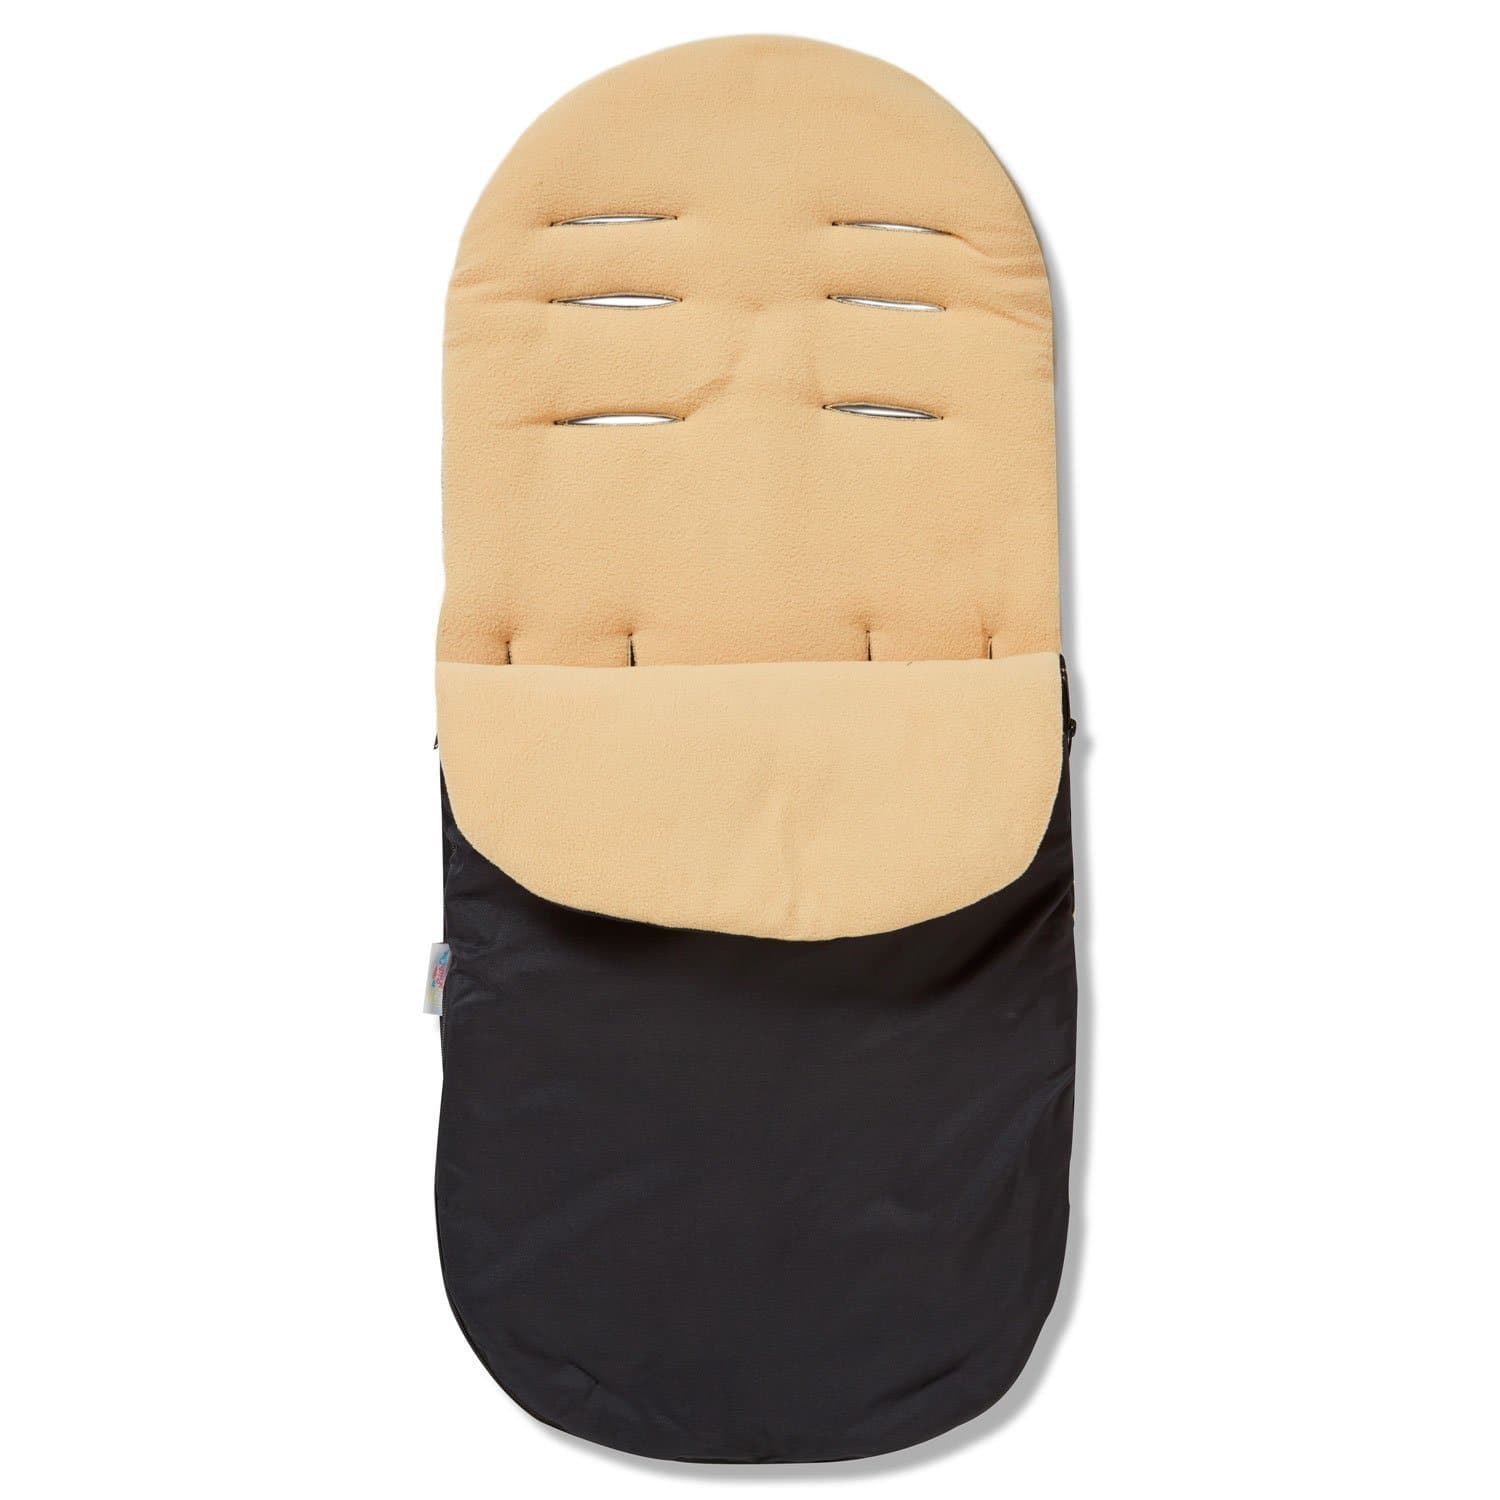 Footmuff / Cosy Toes Compatible with Inglesina - Sand / Fits All Models | For Your Little One